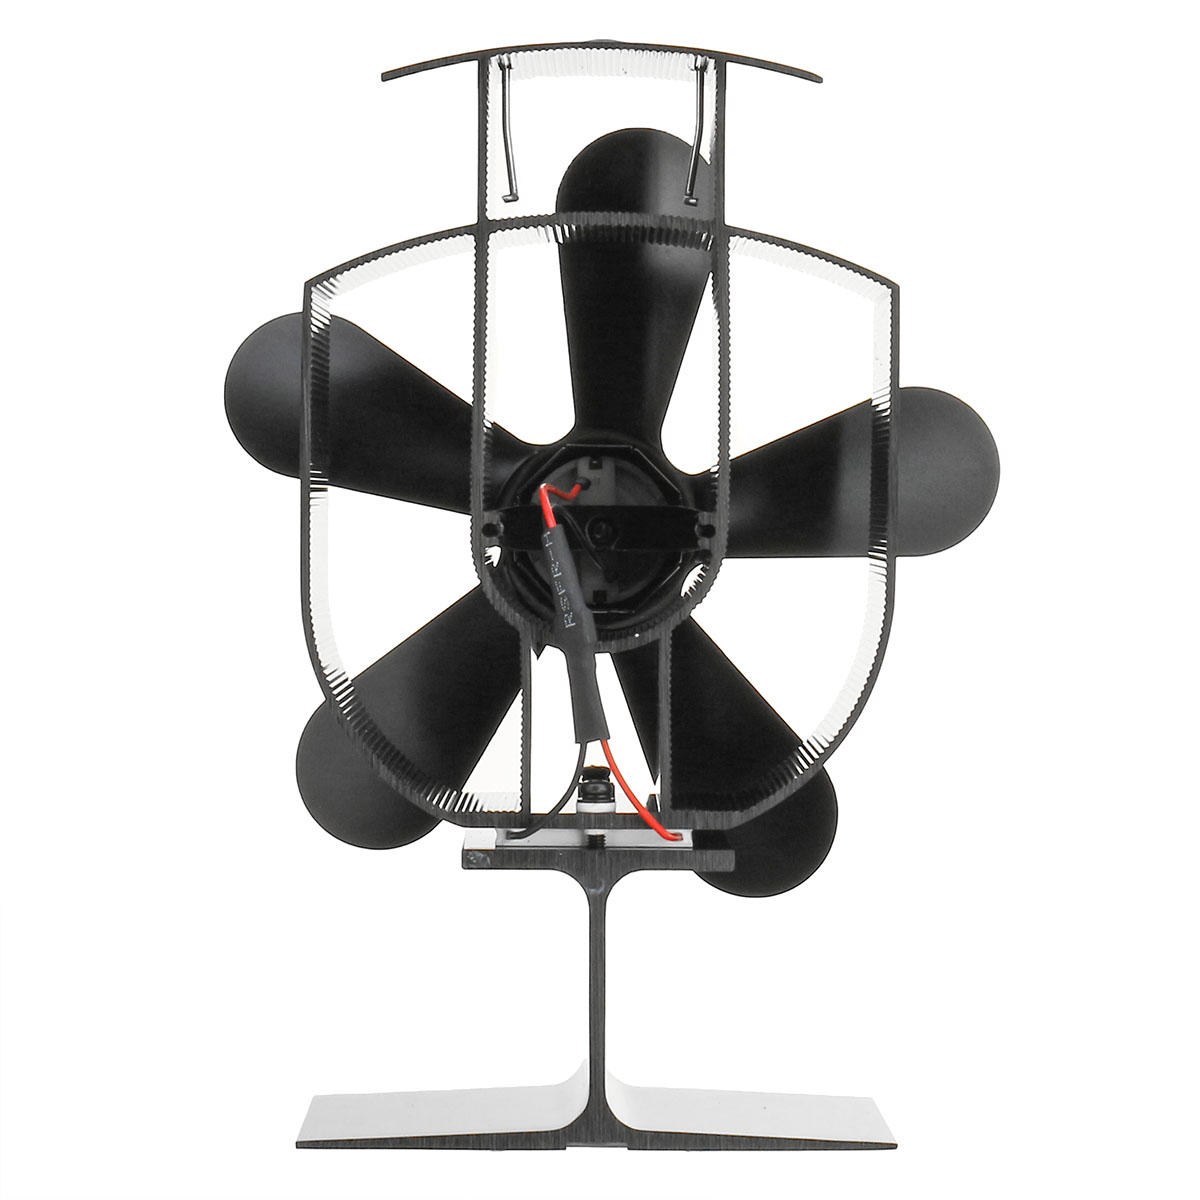 Iron Fireplace tools Awesome 5 Blade Heat Powered Wood Stove Fan 1100rpm Ultra Quiet Fireplace Wood Burning Eco Fan